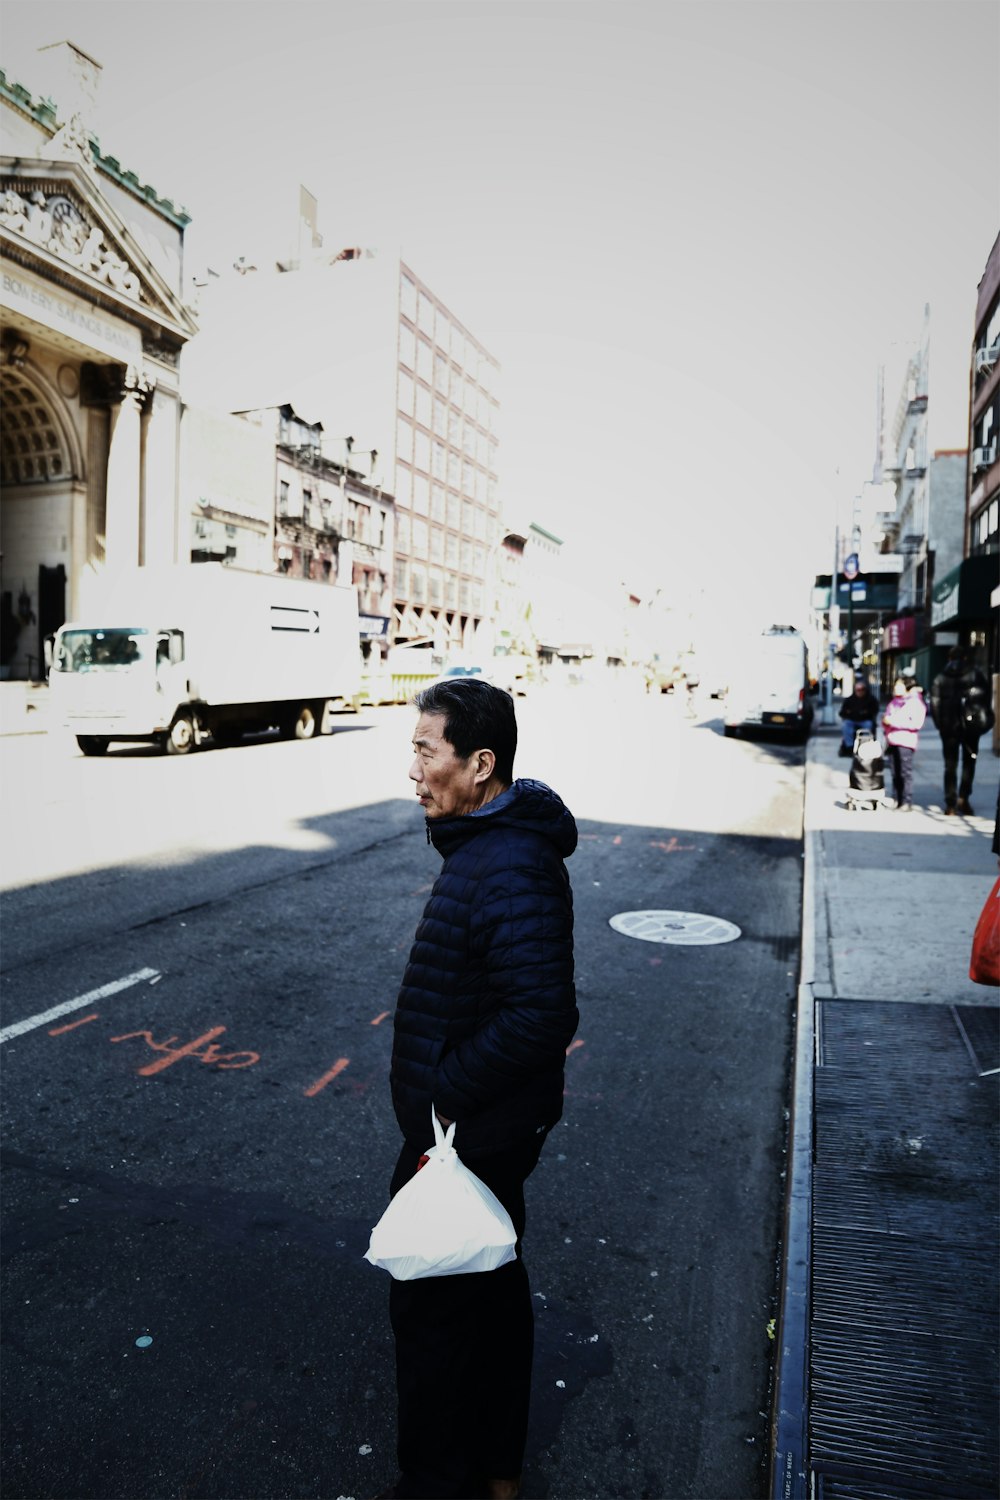 man carrying plastic bag while standing on roadway